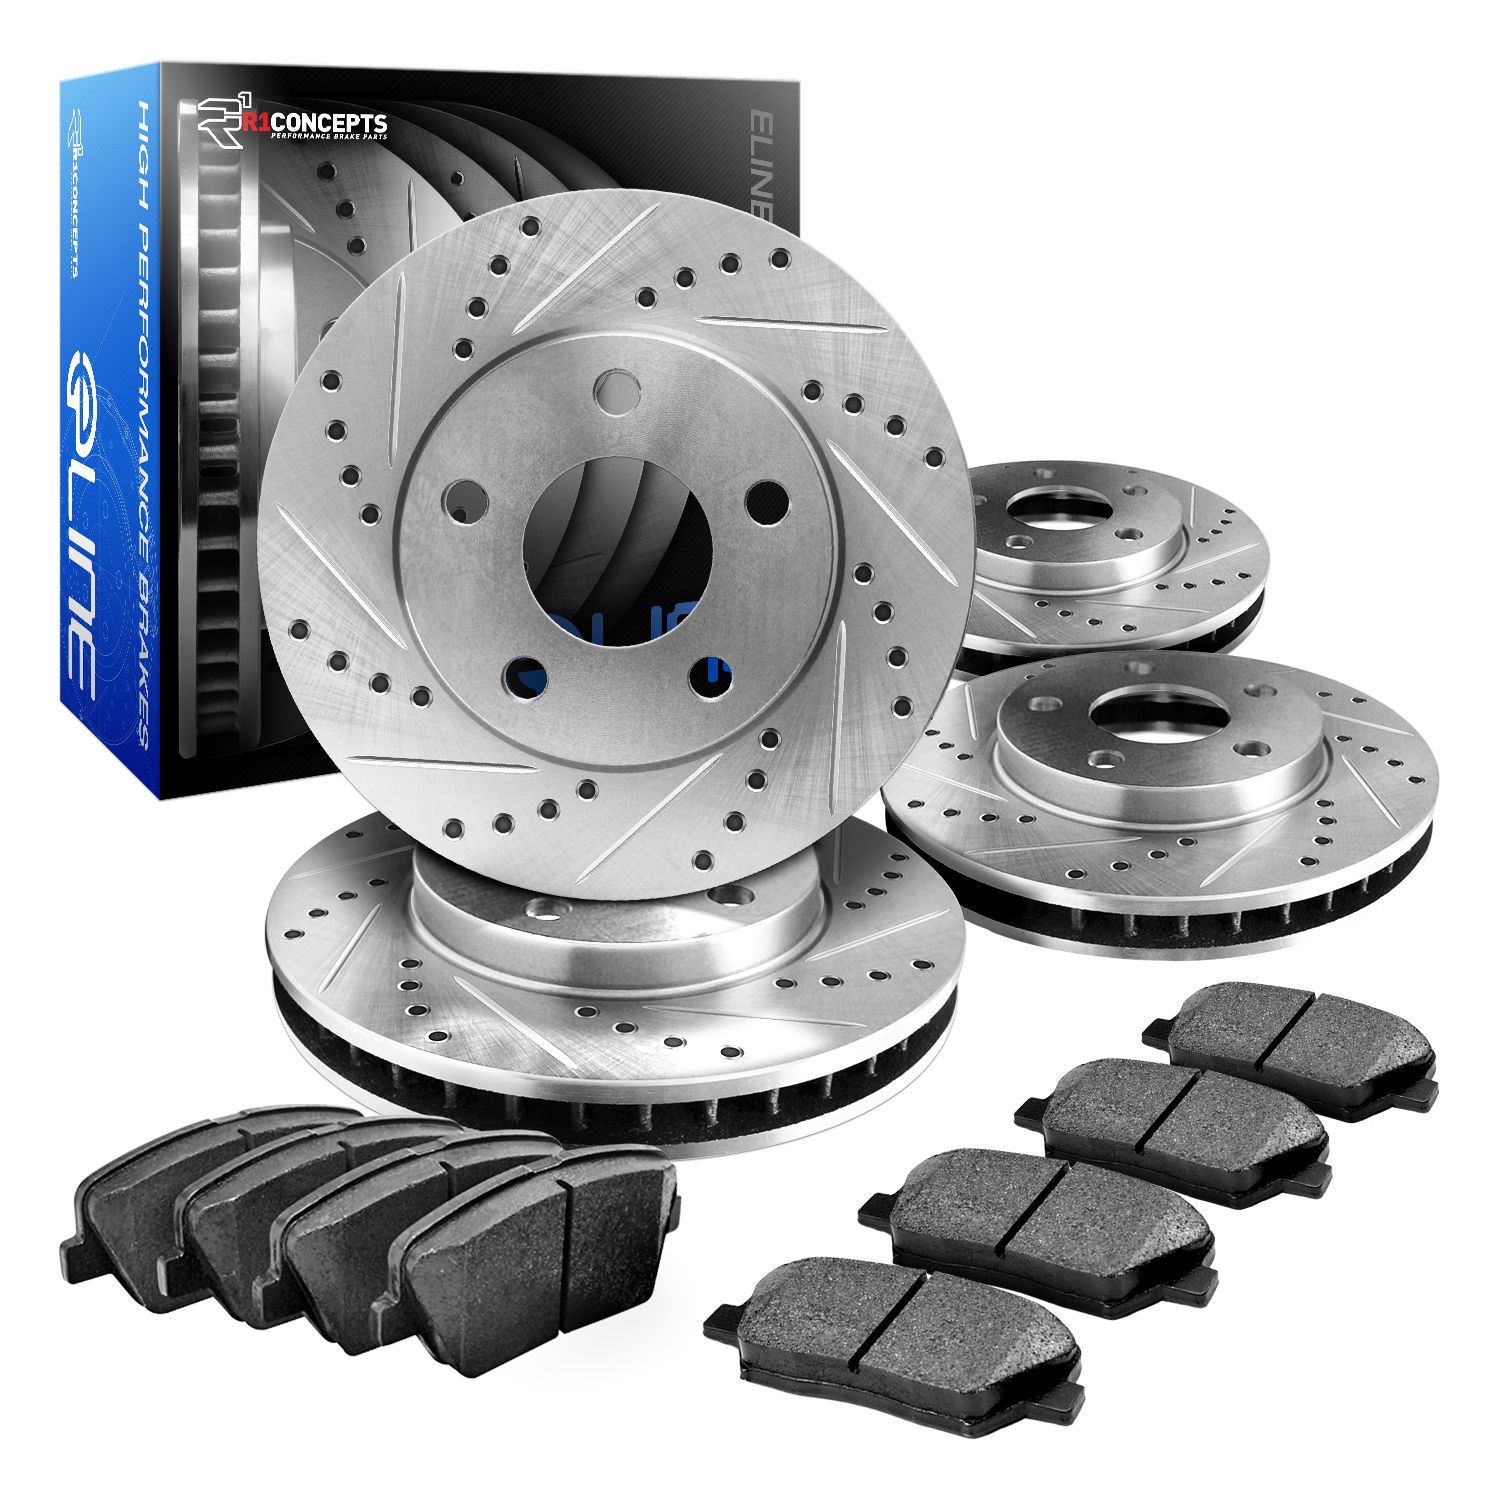 Eline 2013 Dodge Durango Crew Plus 3.6L  Front And Rear Drilled Slotted Brake Rotors + Ceramic Pads